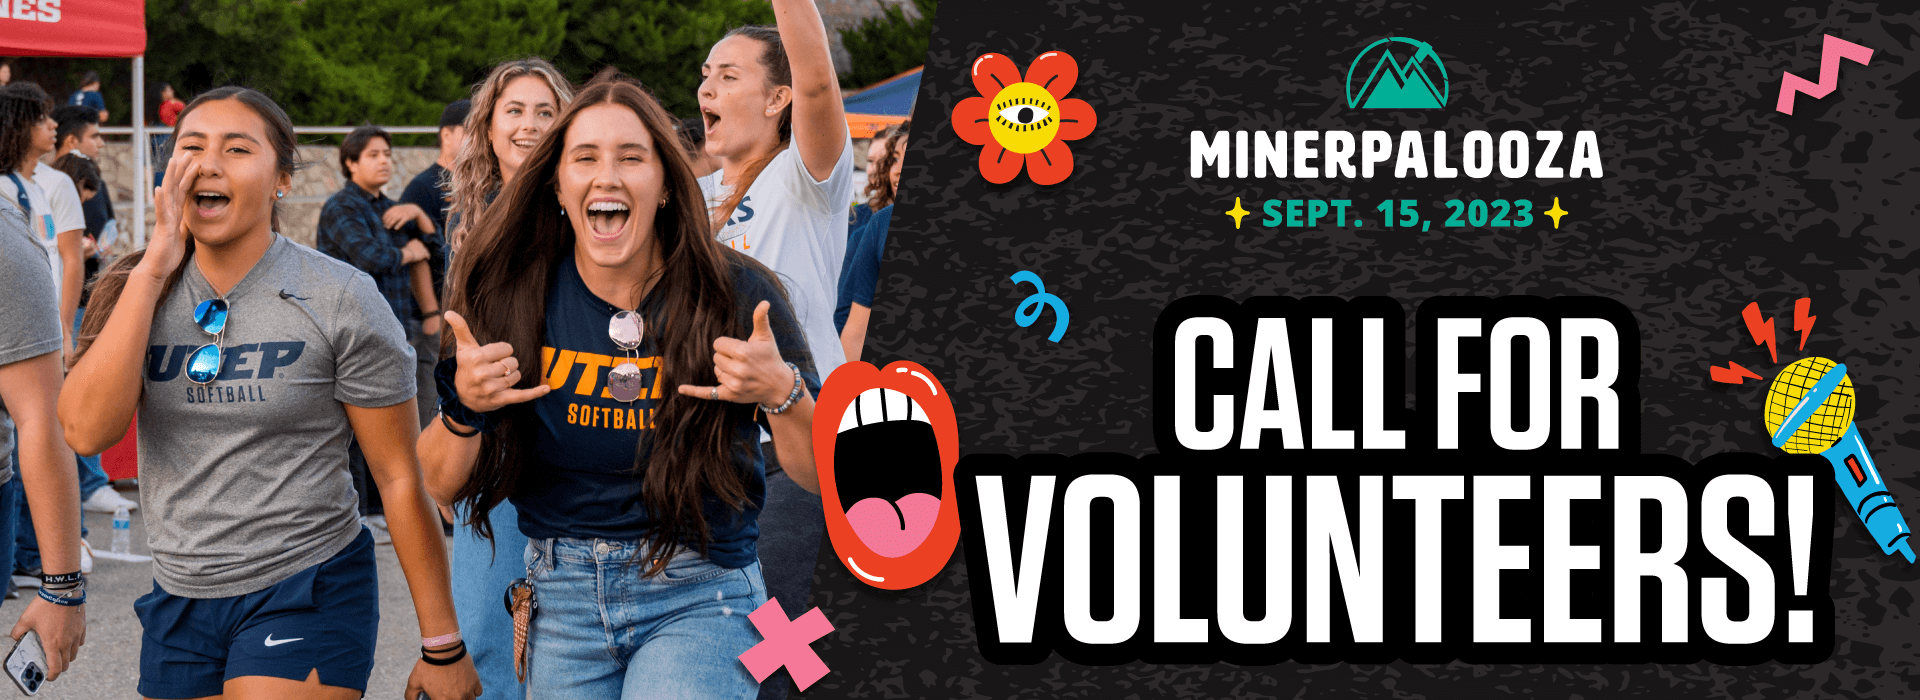 Call for volunteers at Minerpalooza 